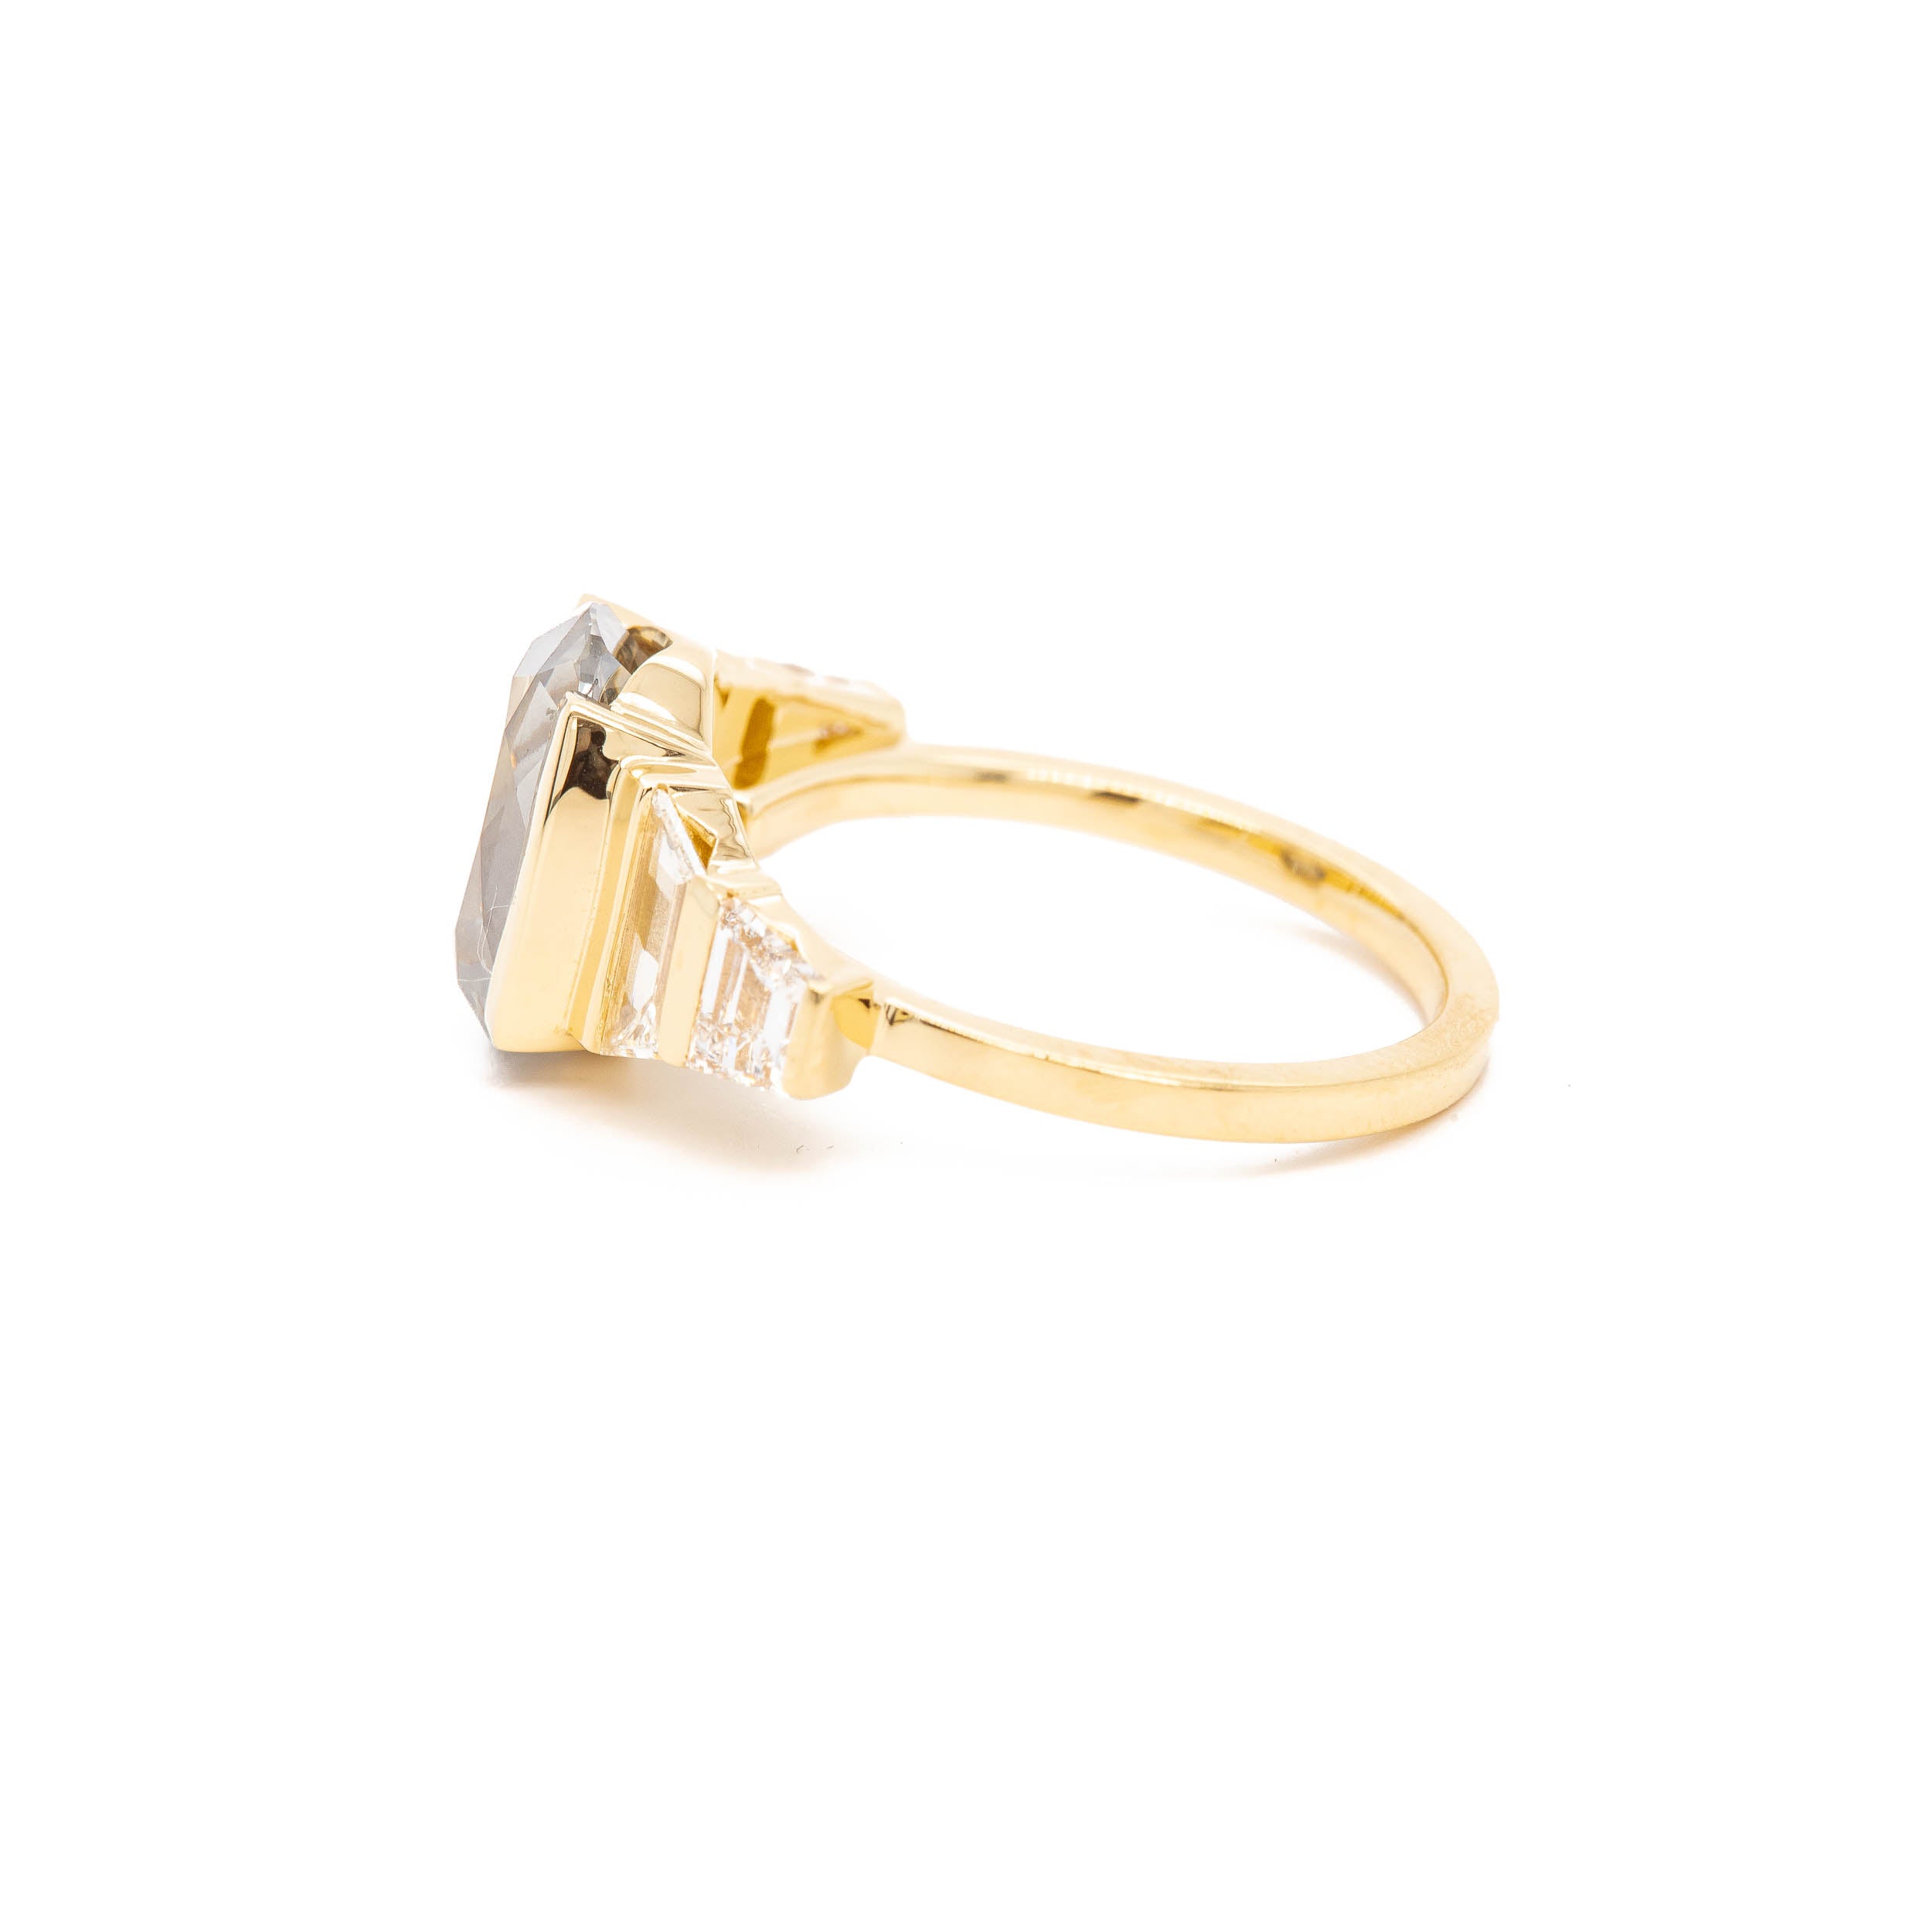 A yellow gold ring with a grey stone and diamonds, The Phantom by Rebecca Overmann.